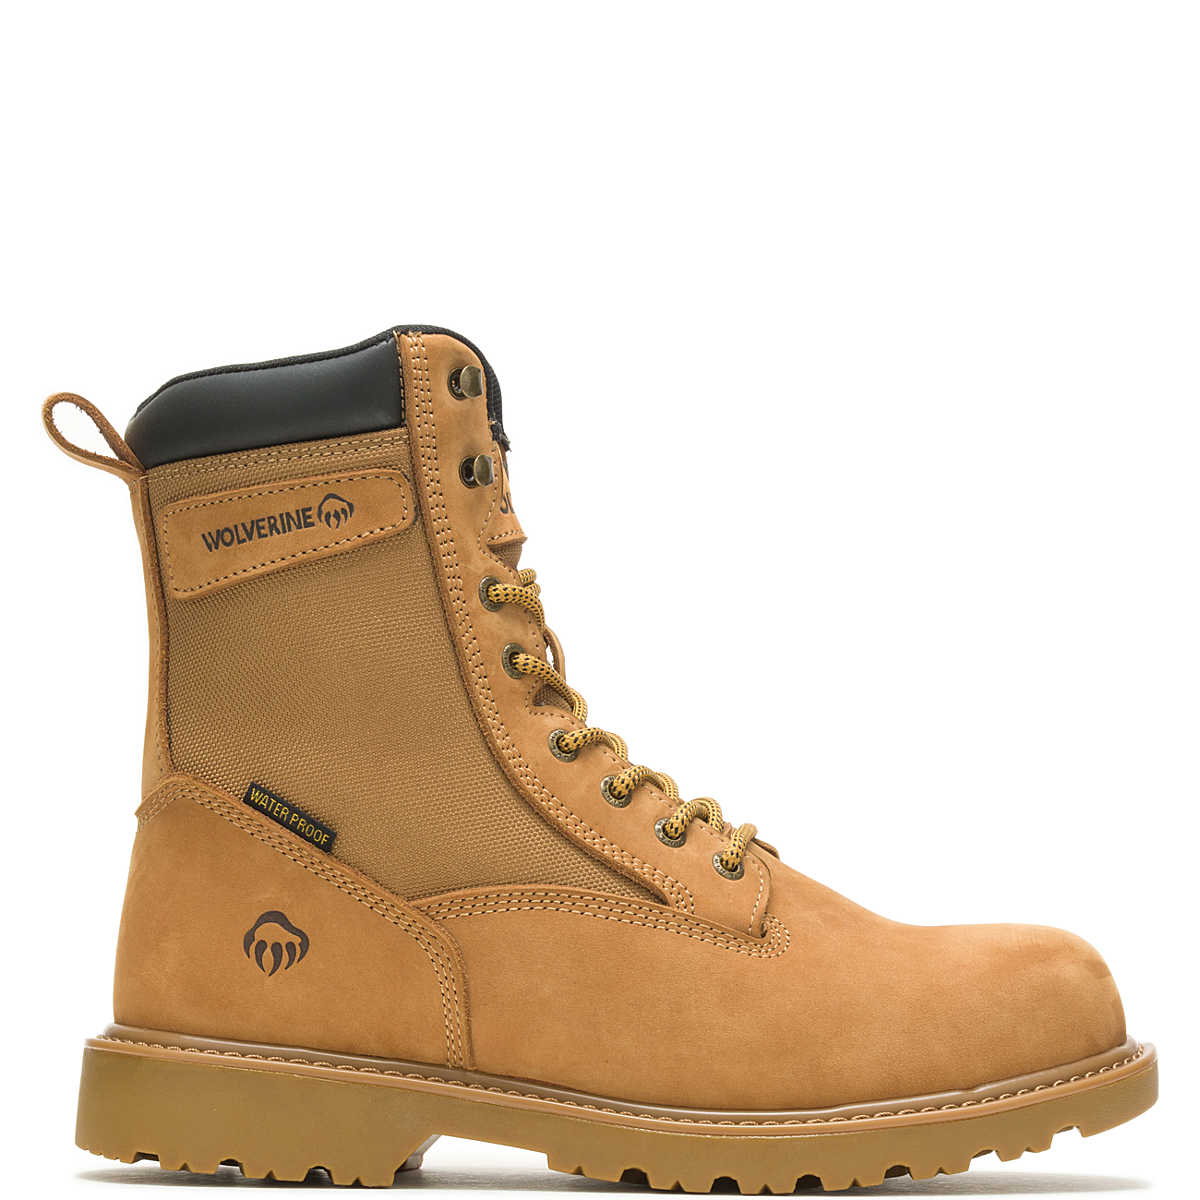 Floorhand Insulated 8" Work Boot, Wheat, dynamic 1